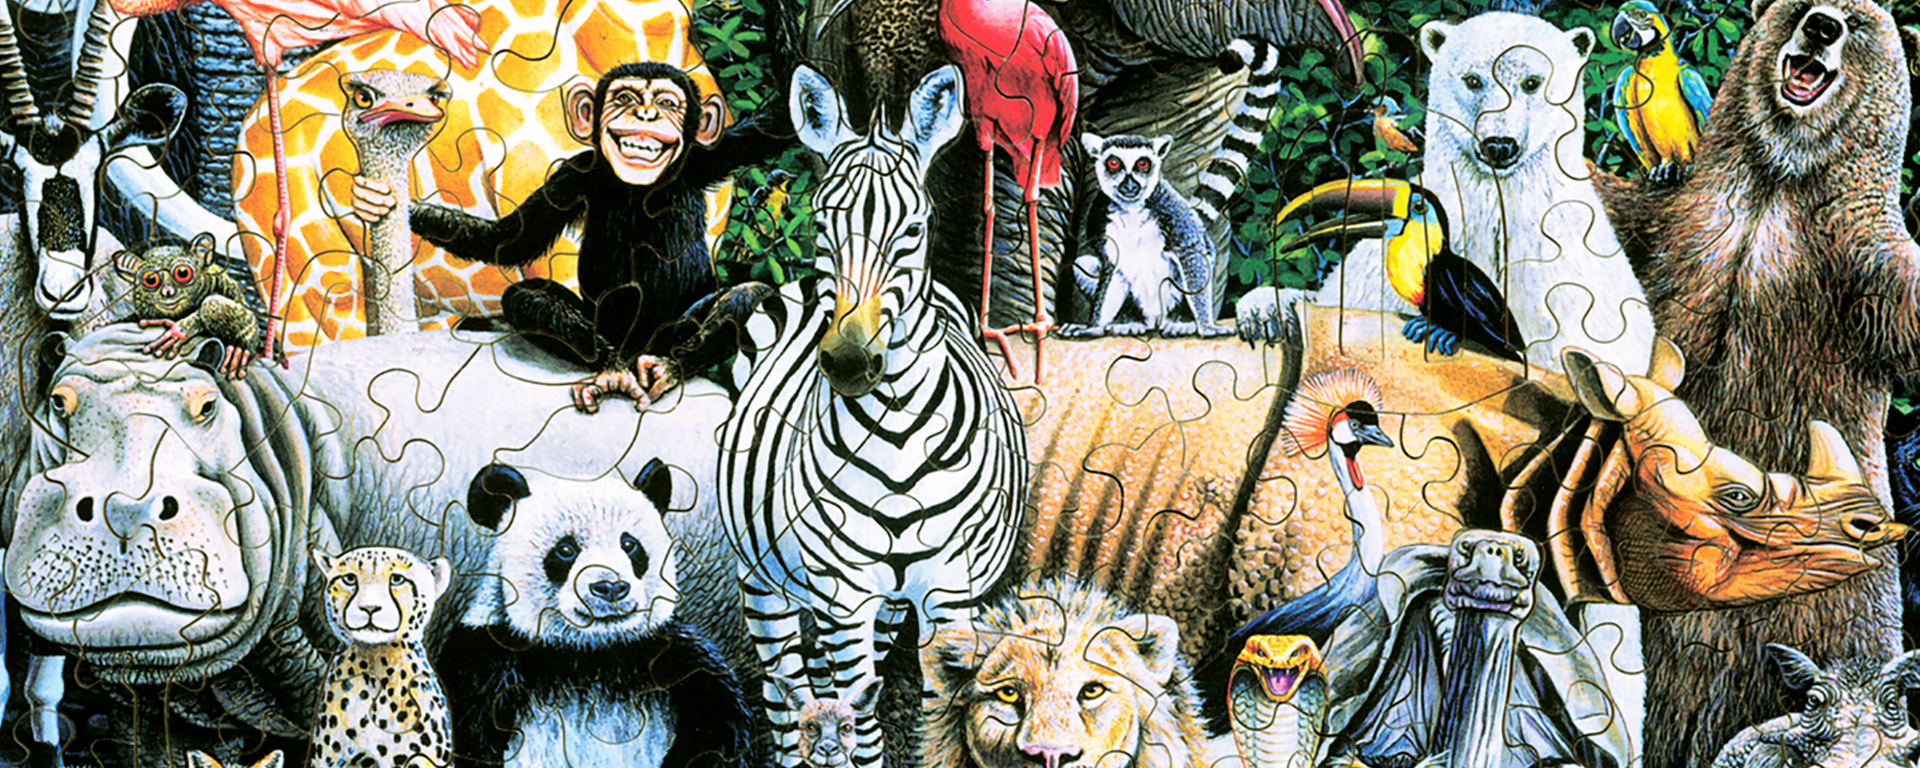 Wooden animal jigsaw puzzle featuring a variety of animals from all over the world.